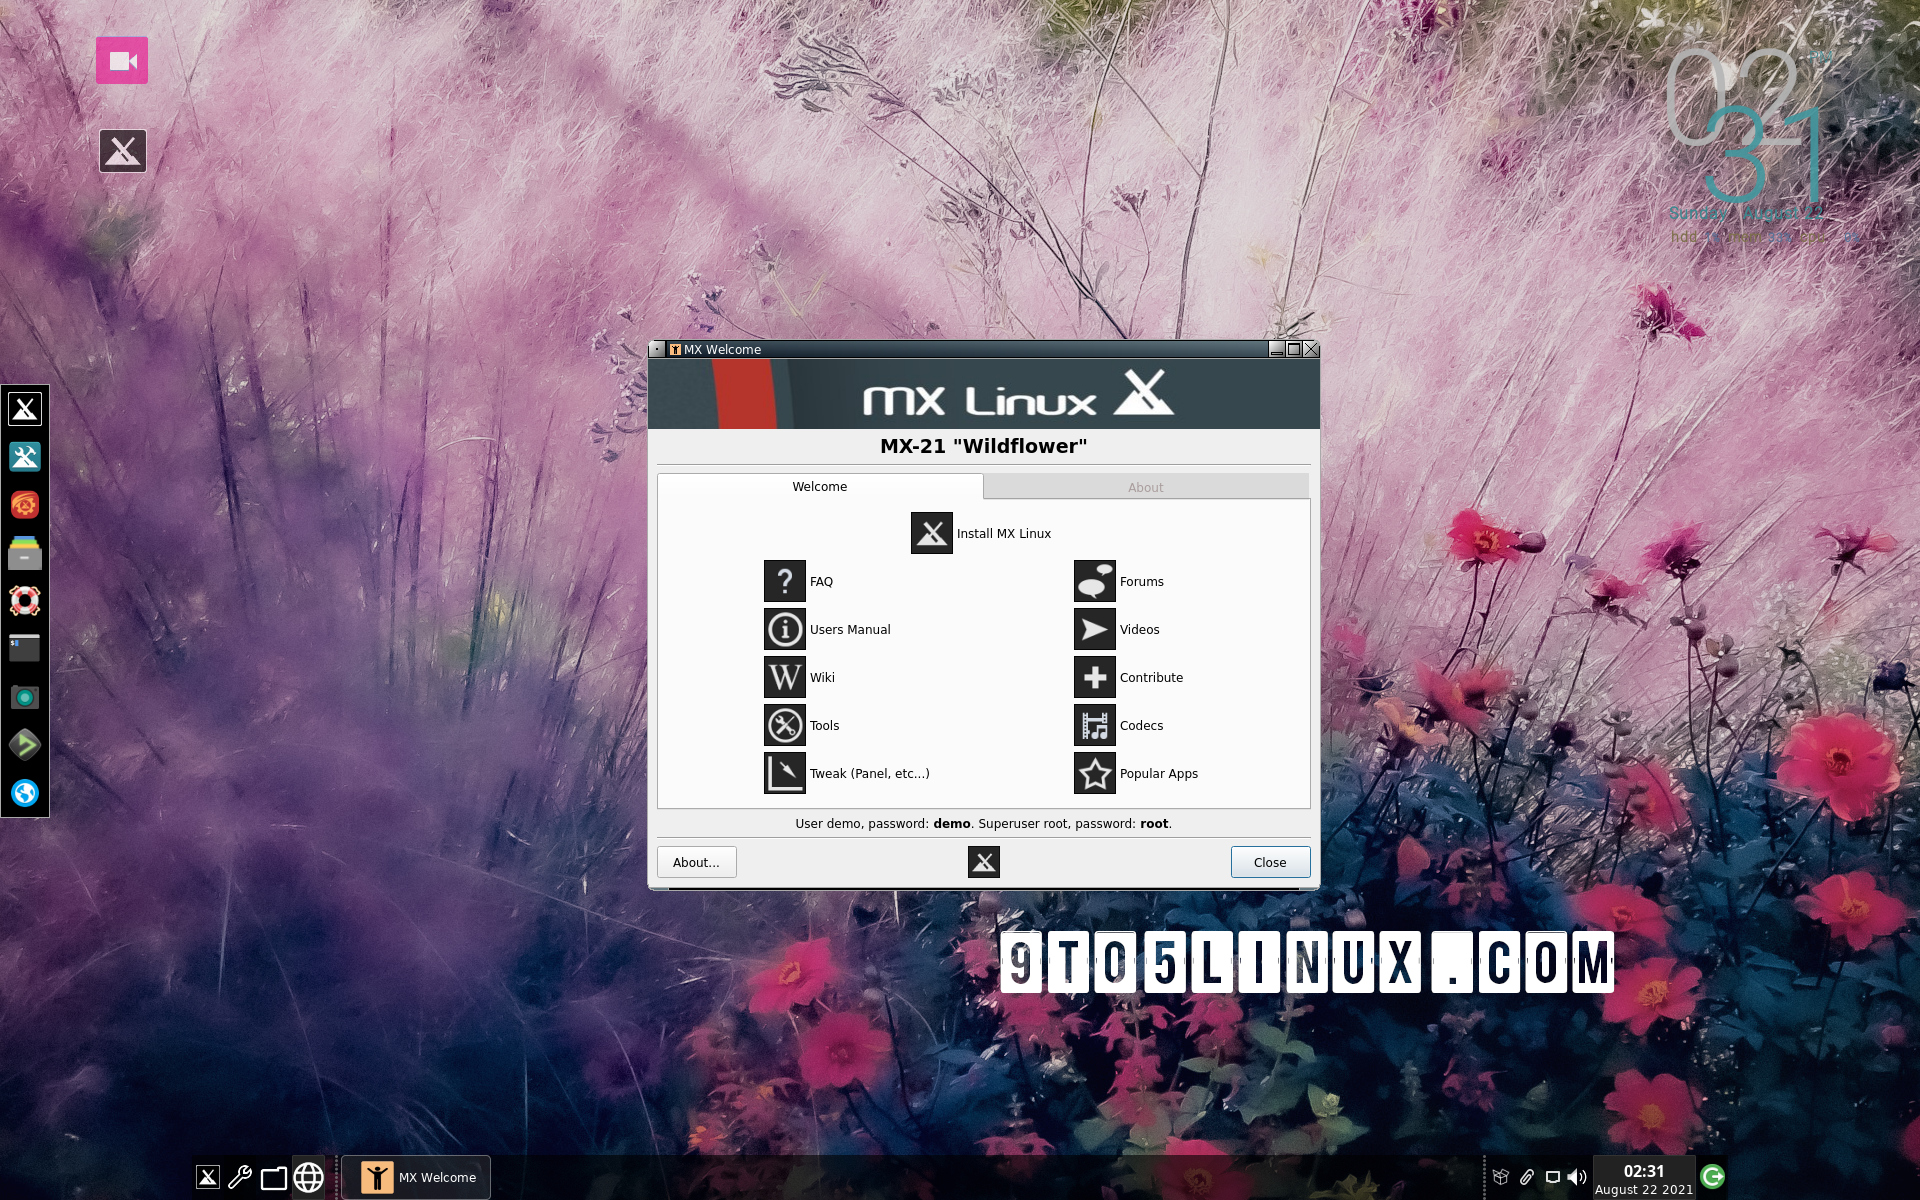 MX Linux 21 Fluxbox Is Ready for Public Beta Testing as a Full Standalone Edition